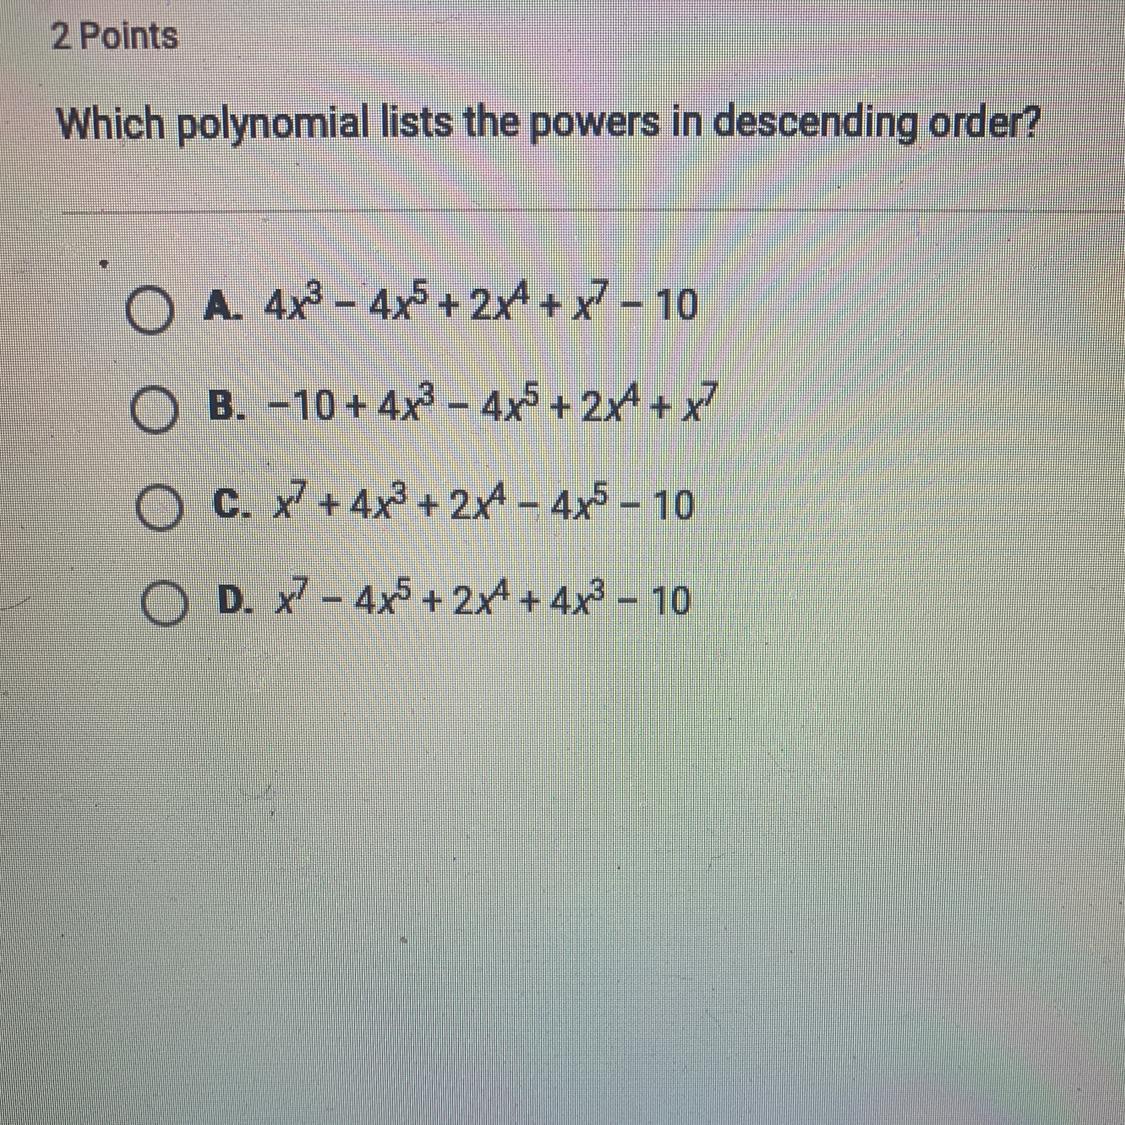 Which polynomial lists the powers in descending order?